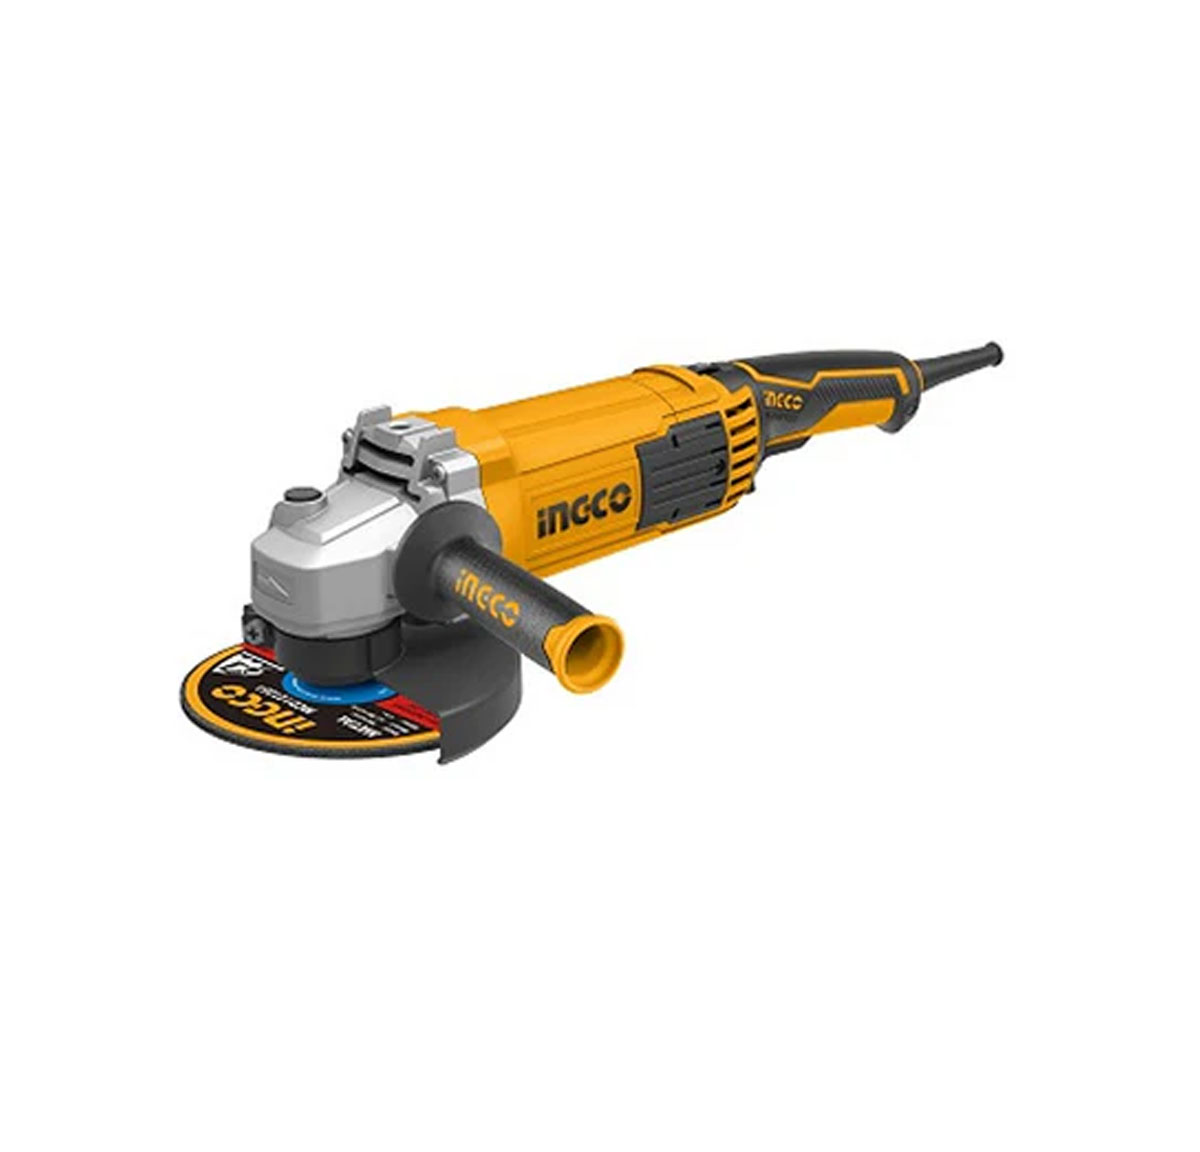 Ingco Angle grinder 1500W 125mm AG150018